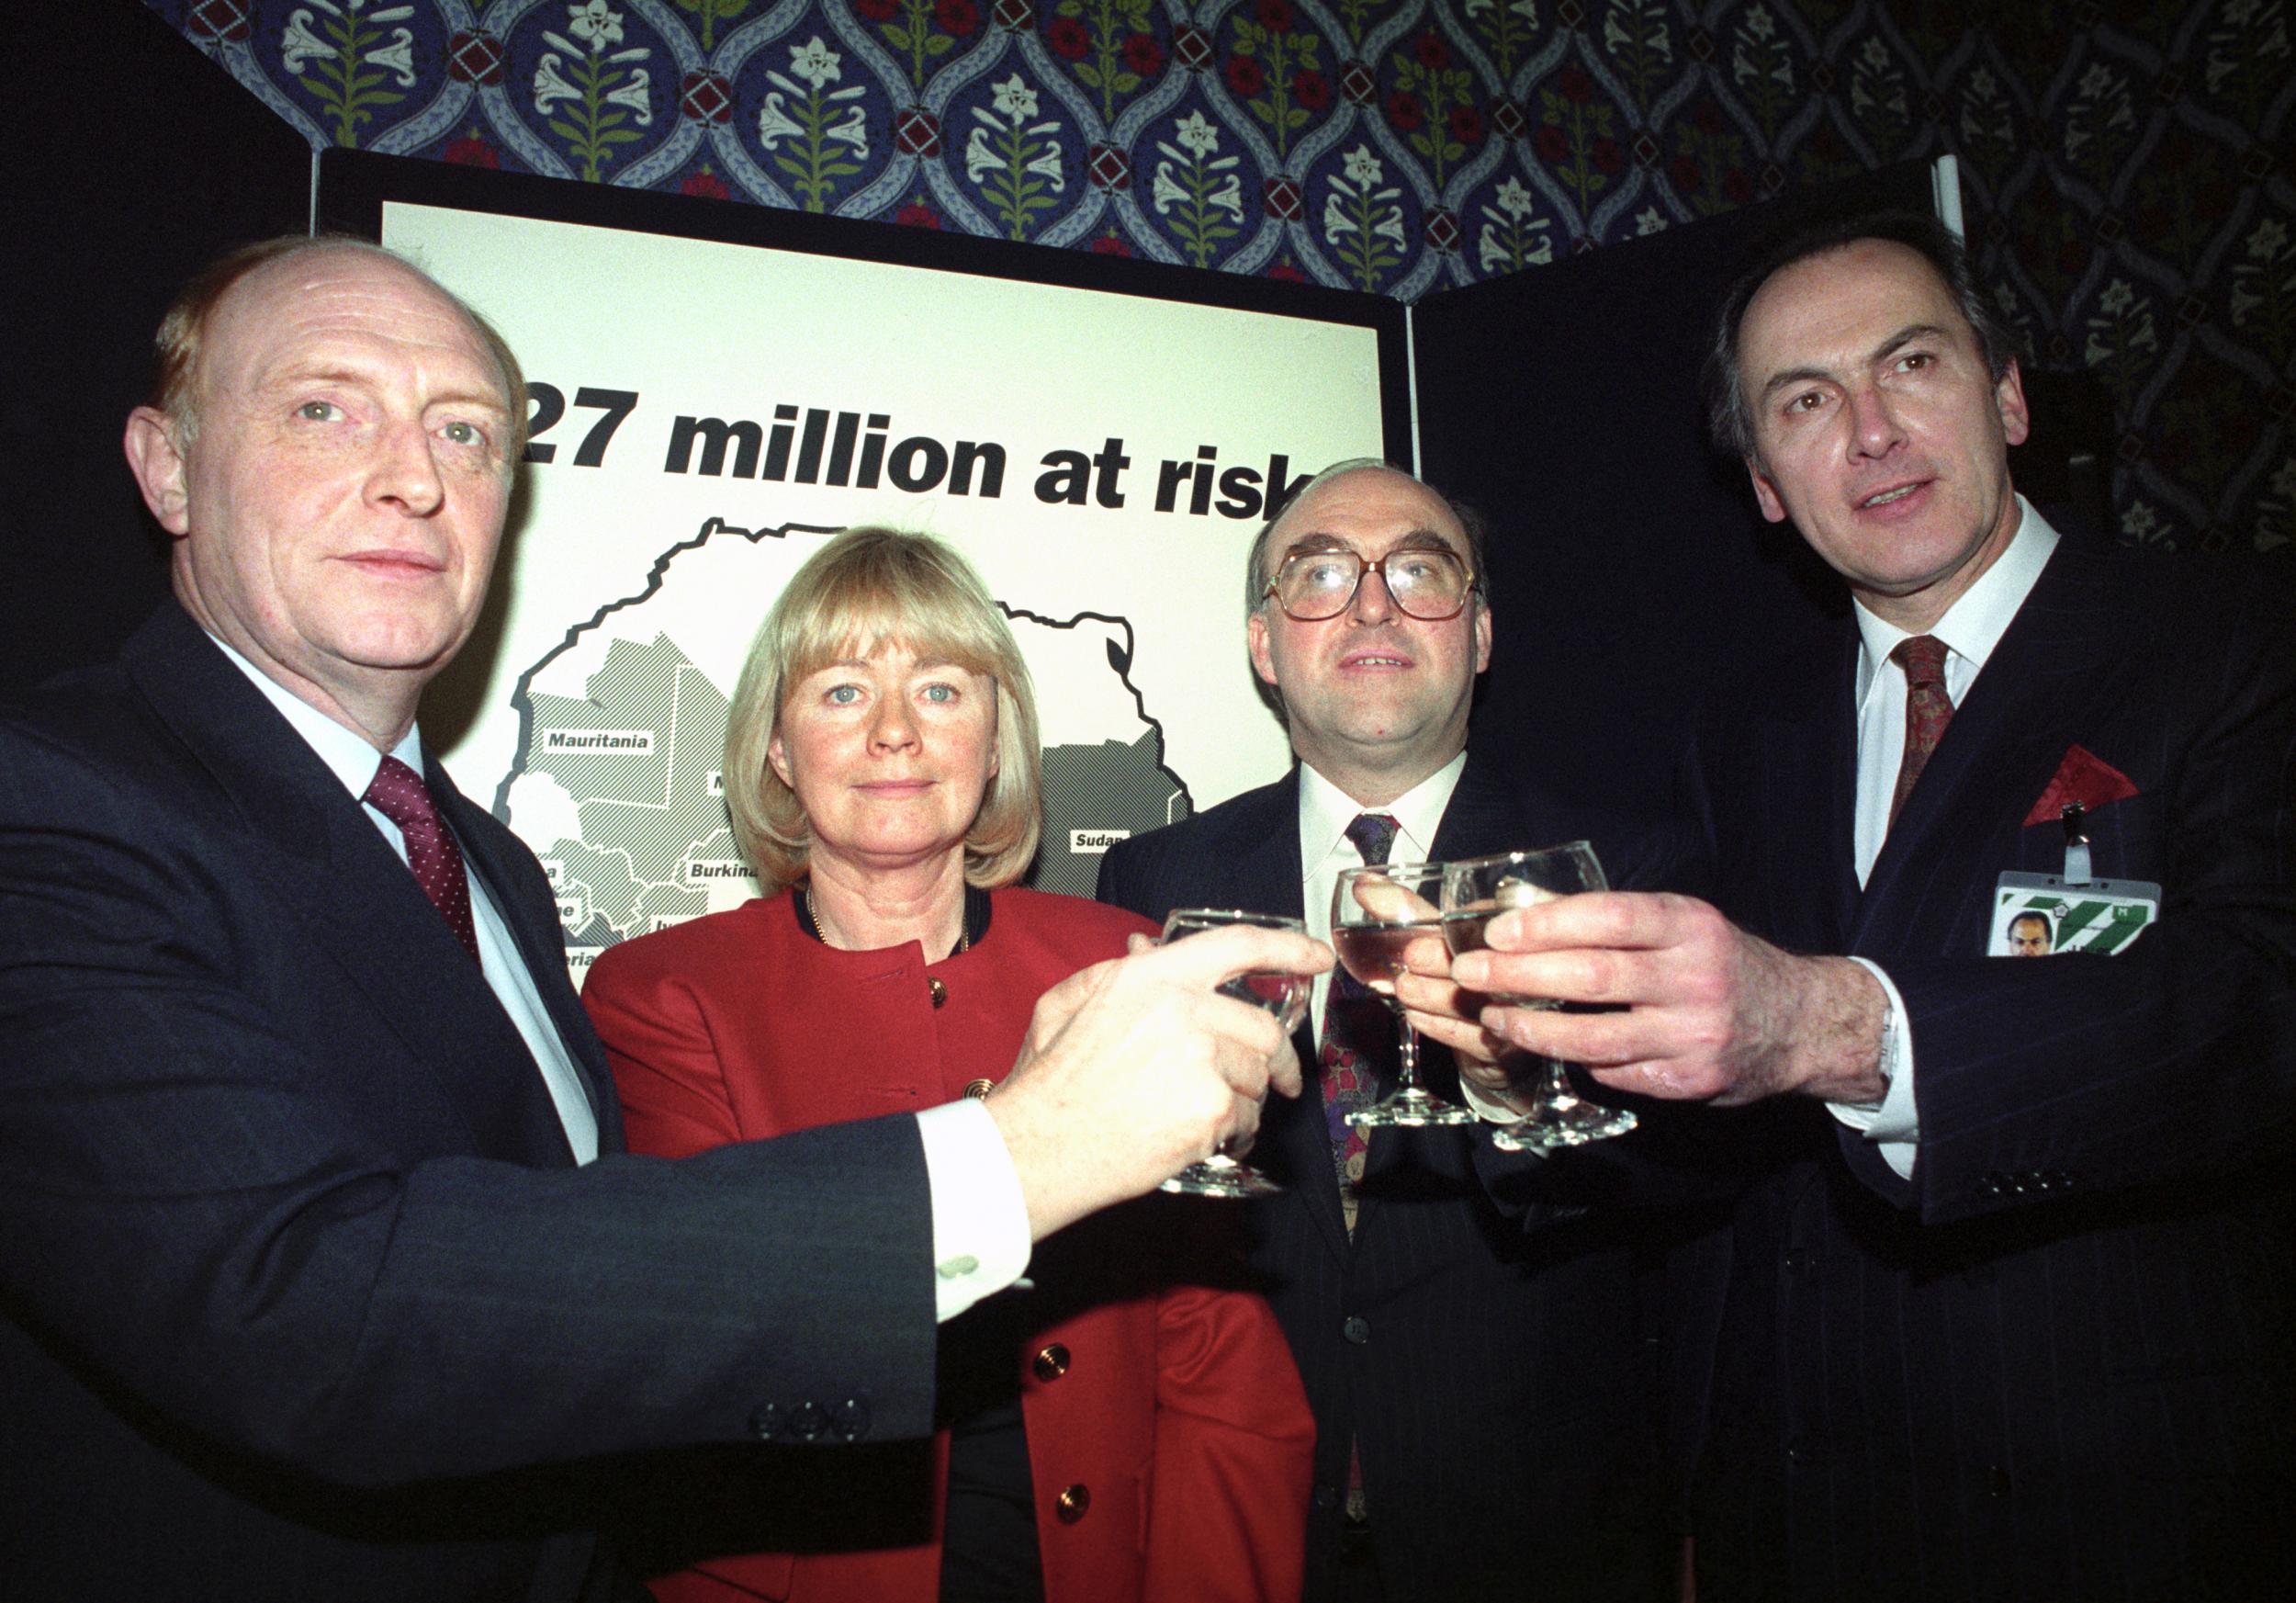 A Life in Focus: John Smith, Labour Party leader, 1992 to 1994, The  Independent